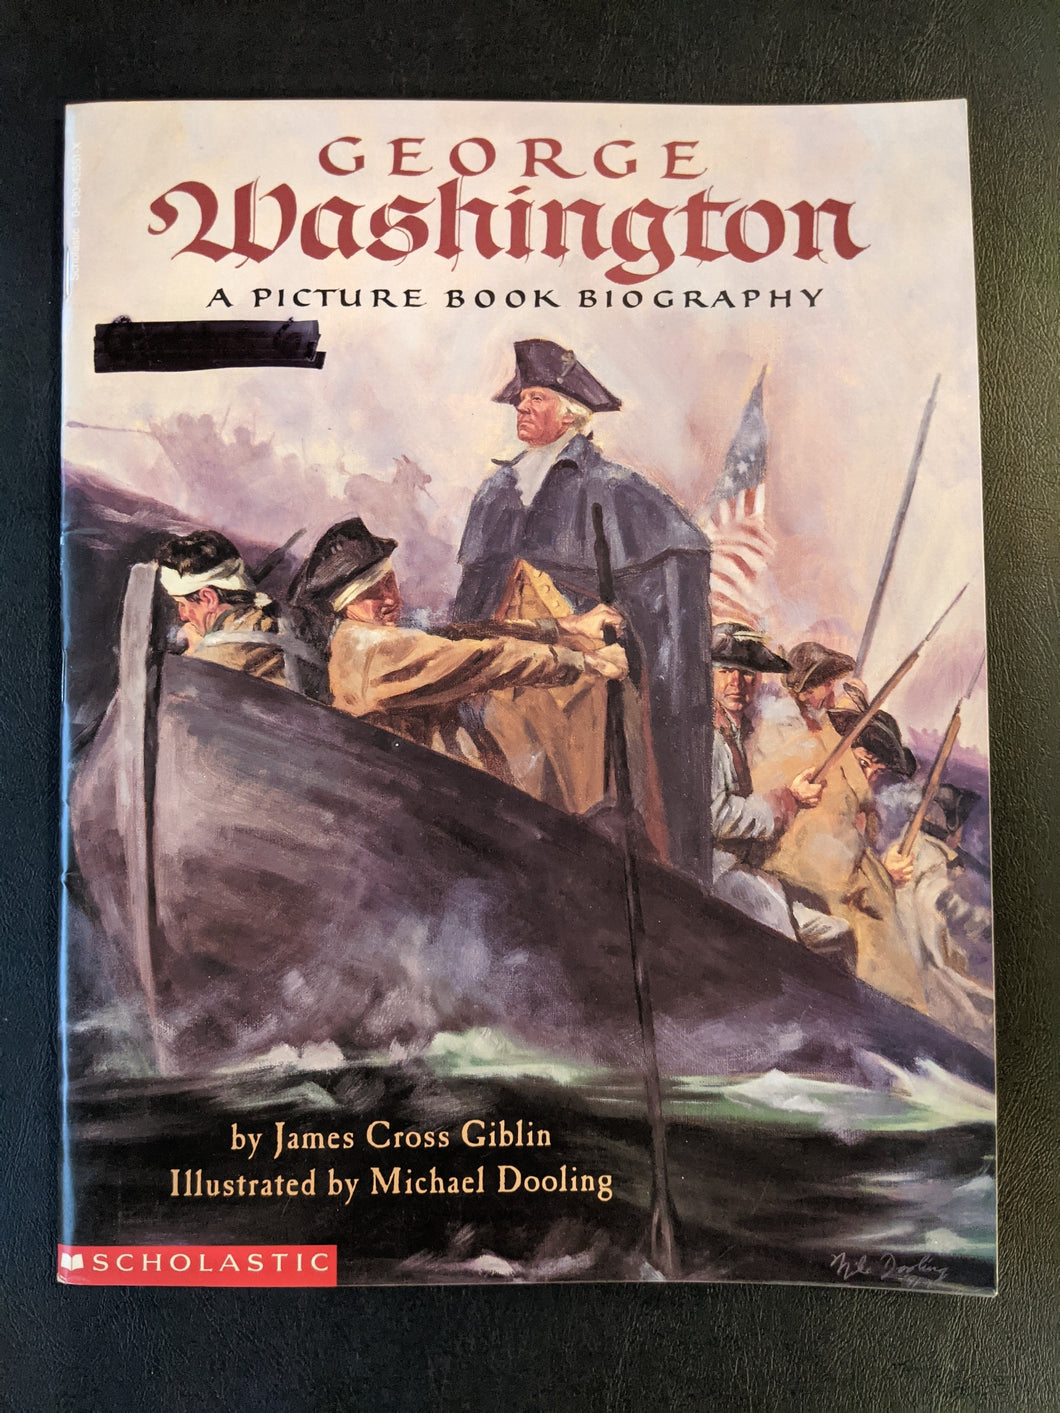 George Washington: A Picture Book Biography by James Cross Giblin